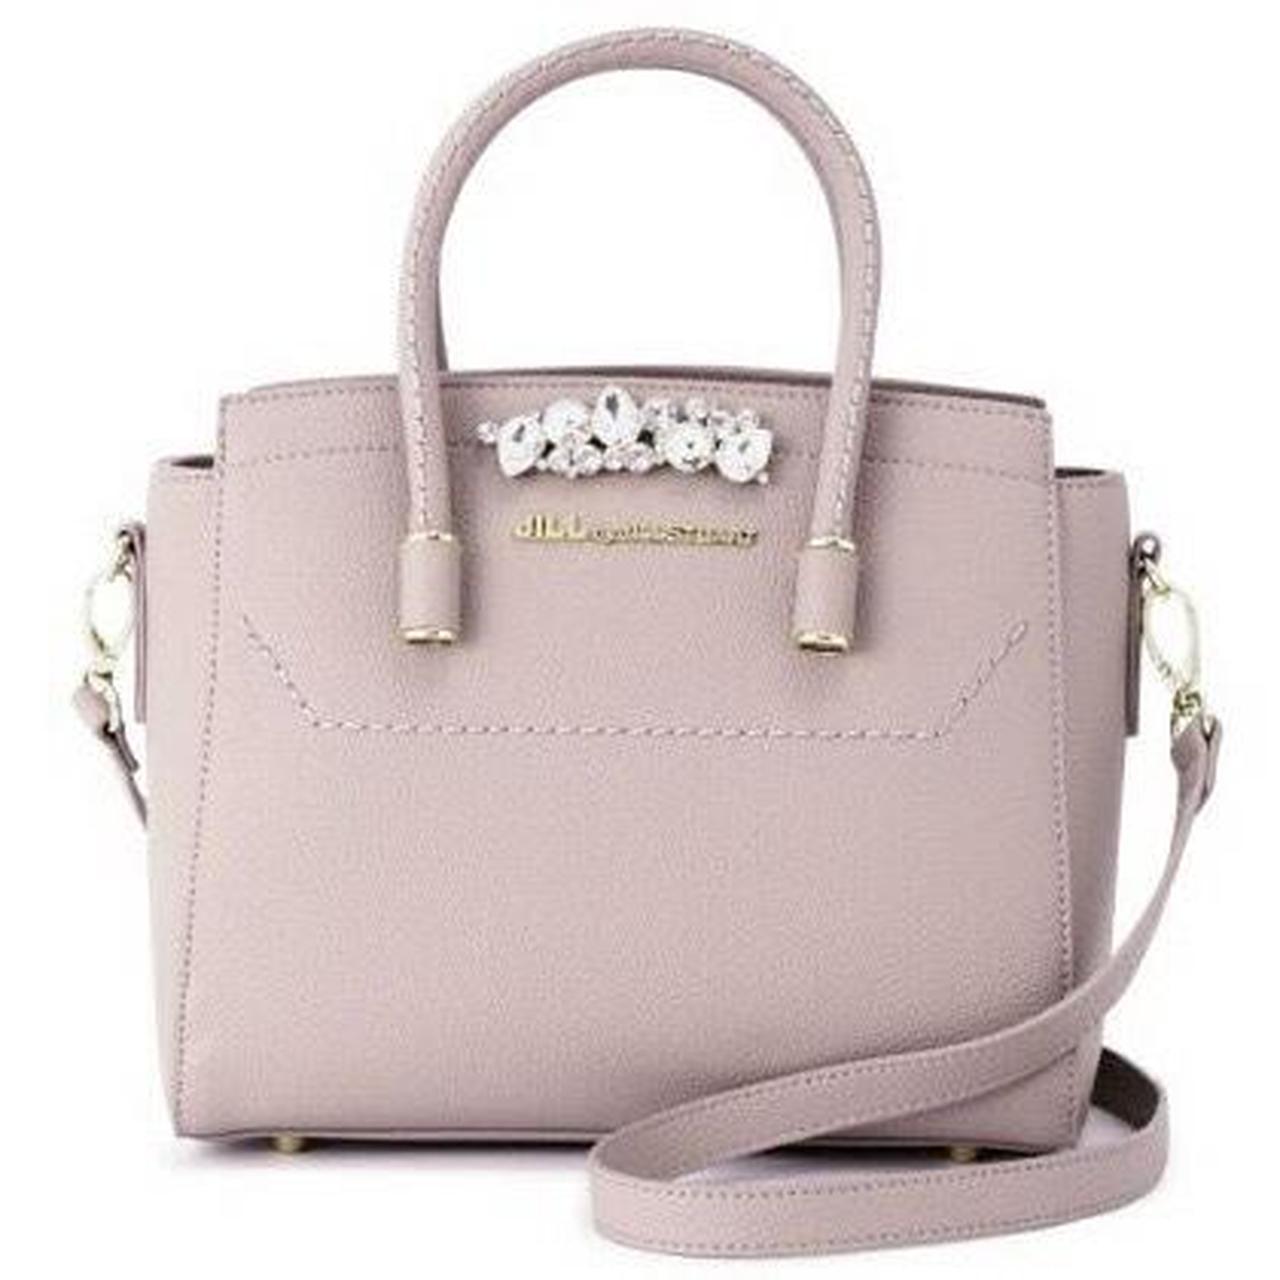 Women's Purple and Gold Bag